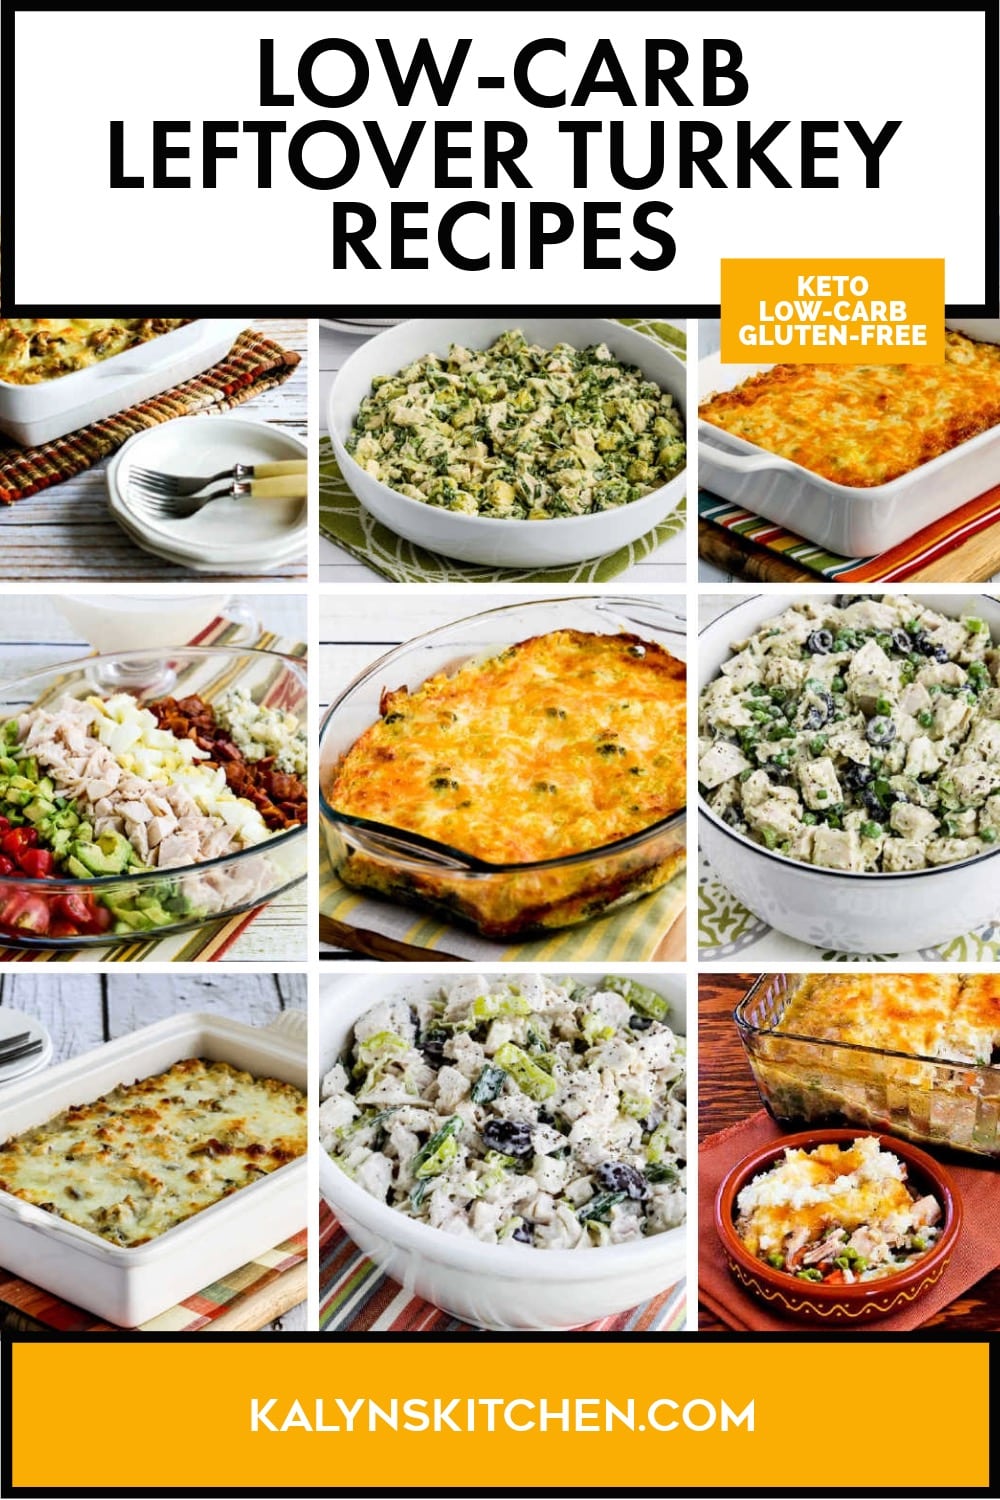 Pinterest image of Low-Carb Leftover Turkey Recipes